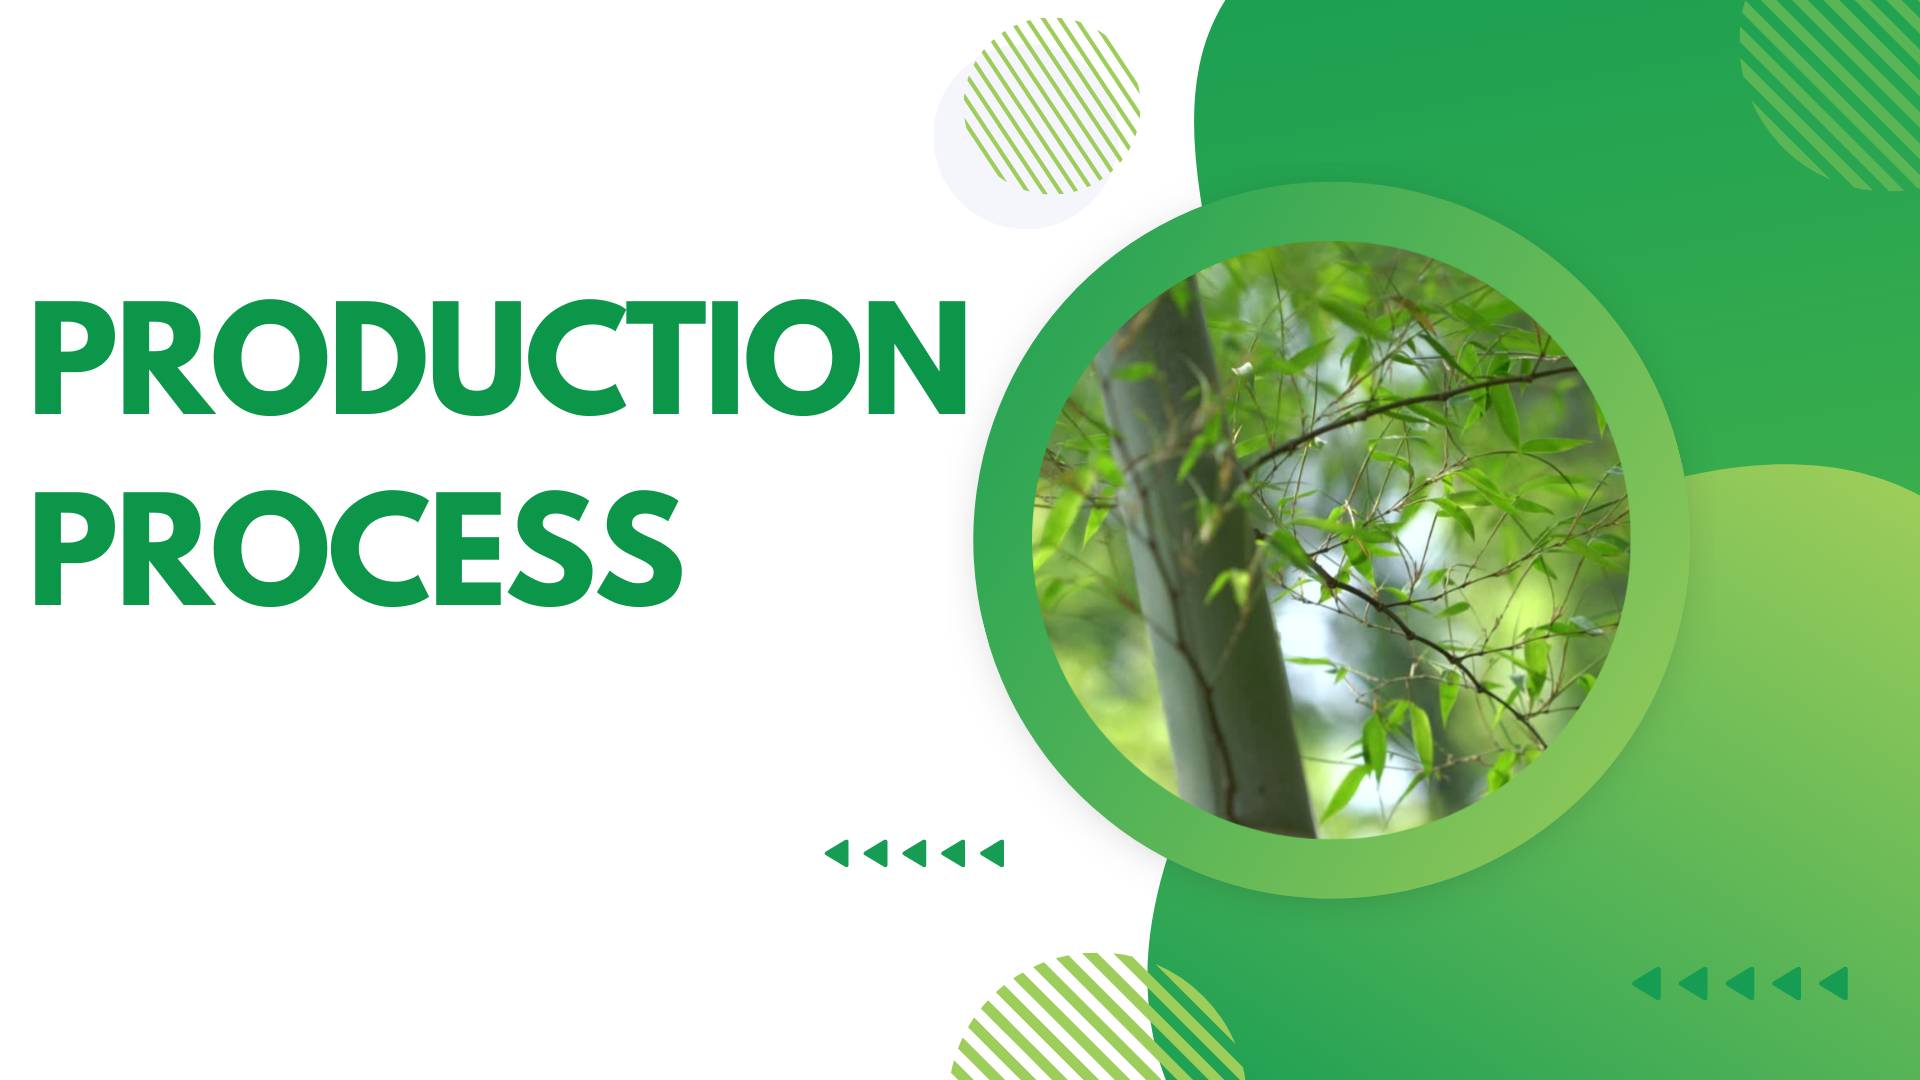 Production process of bamboo products